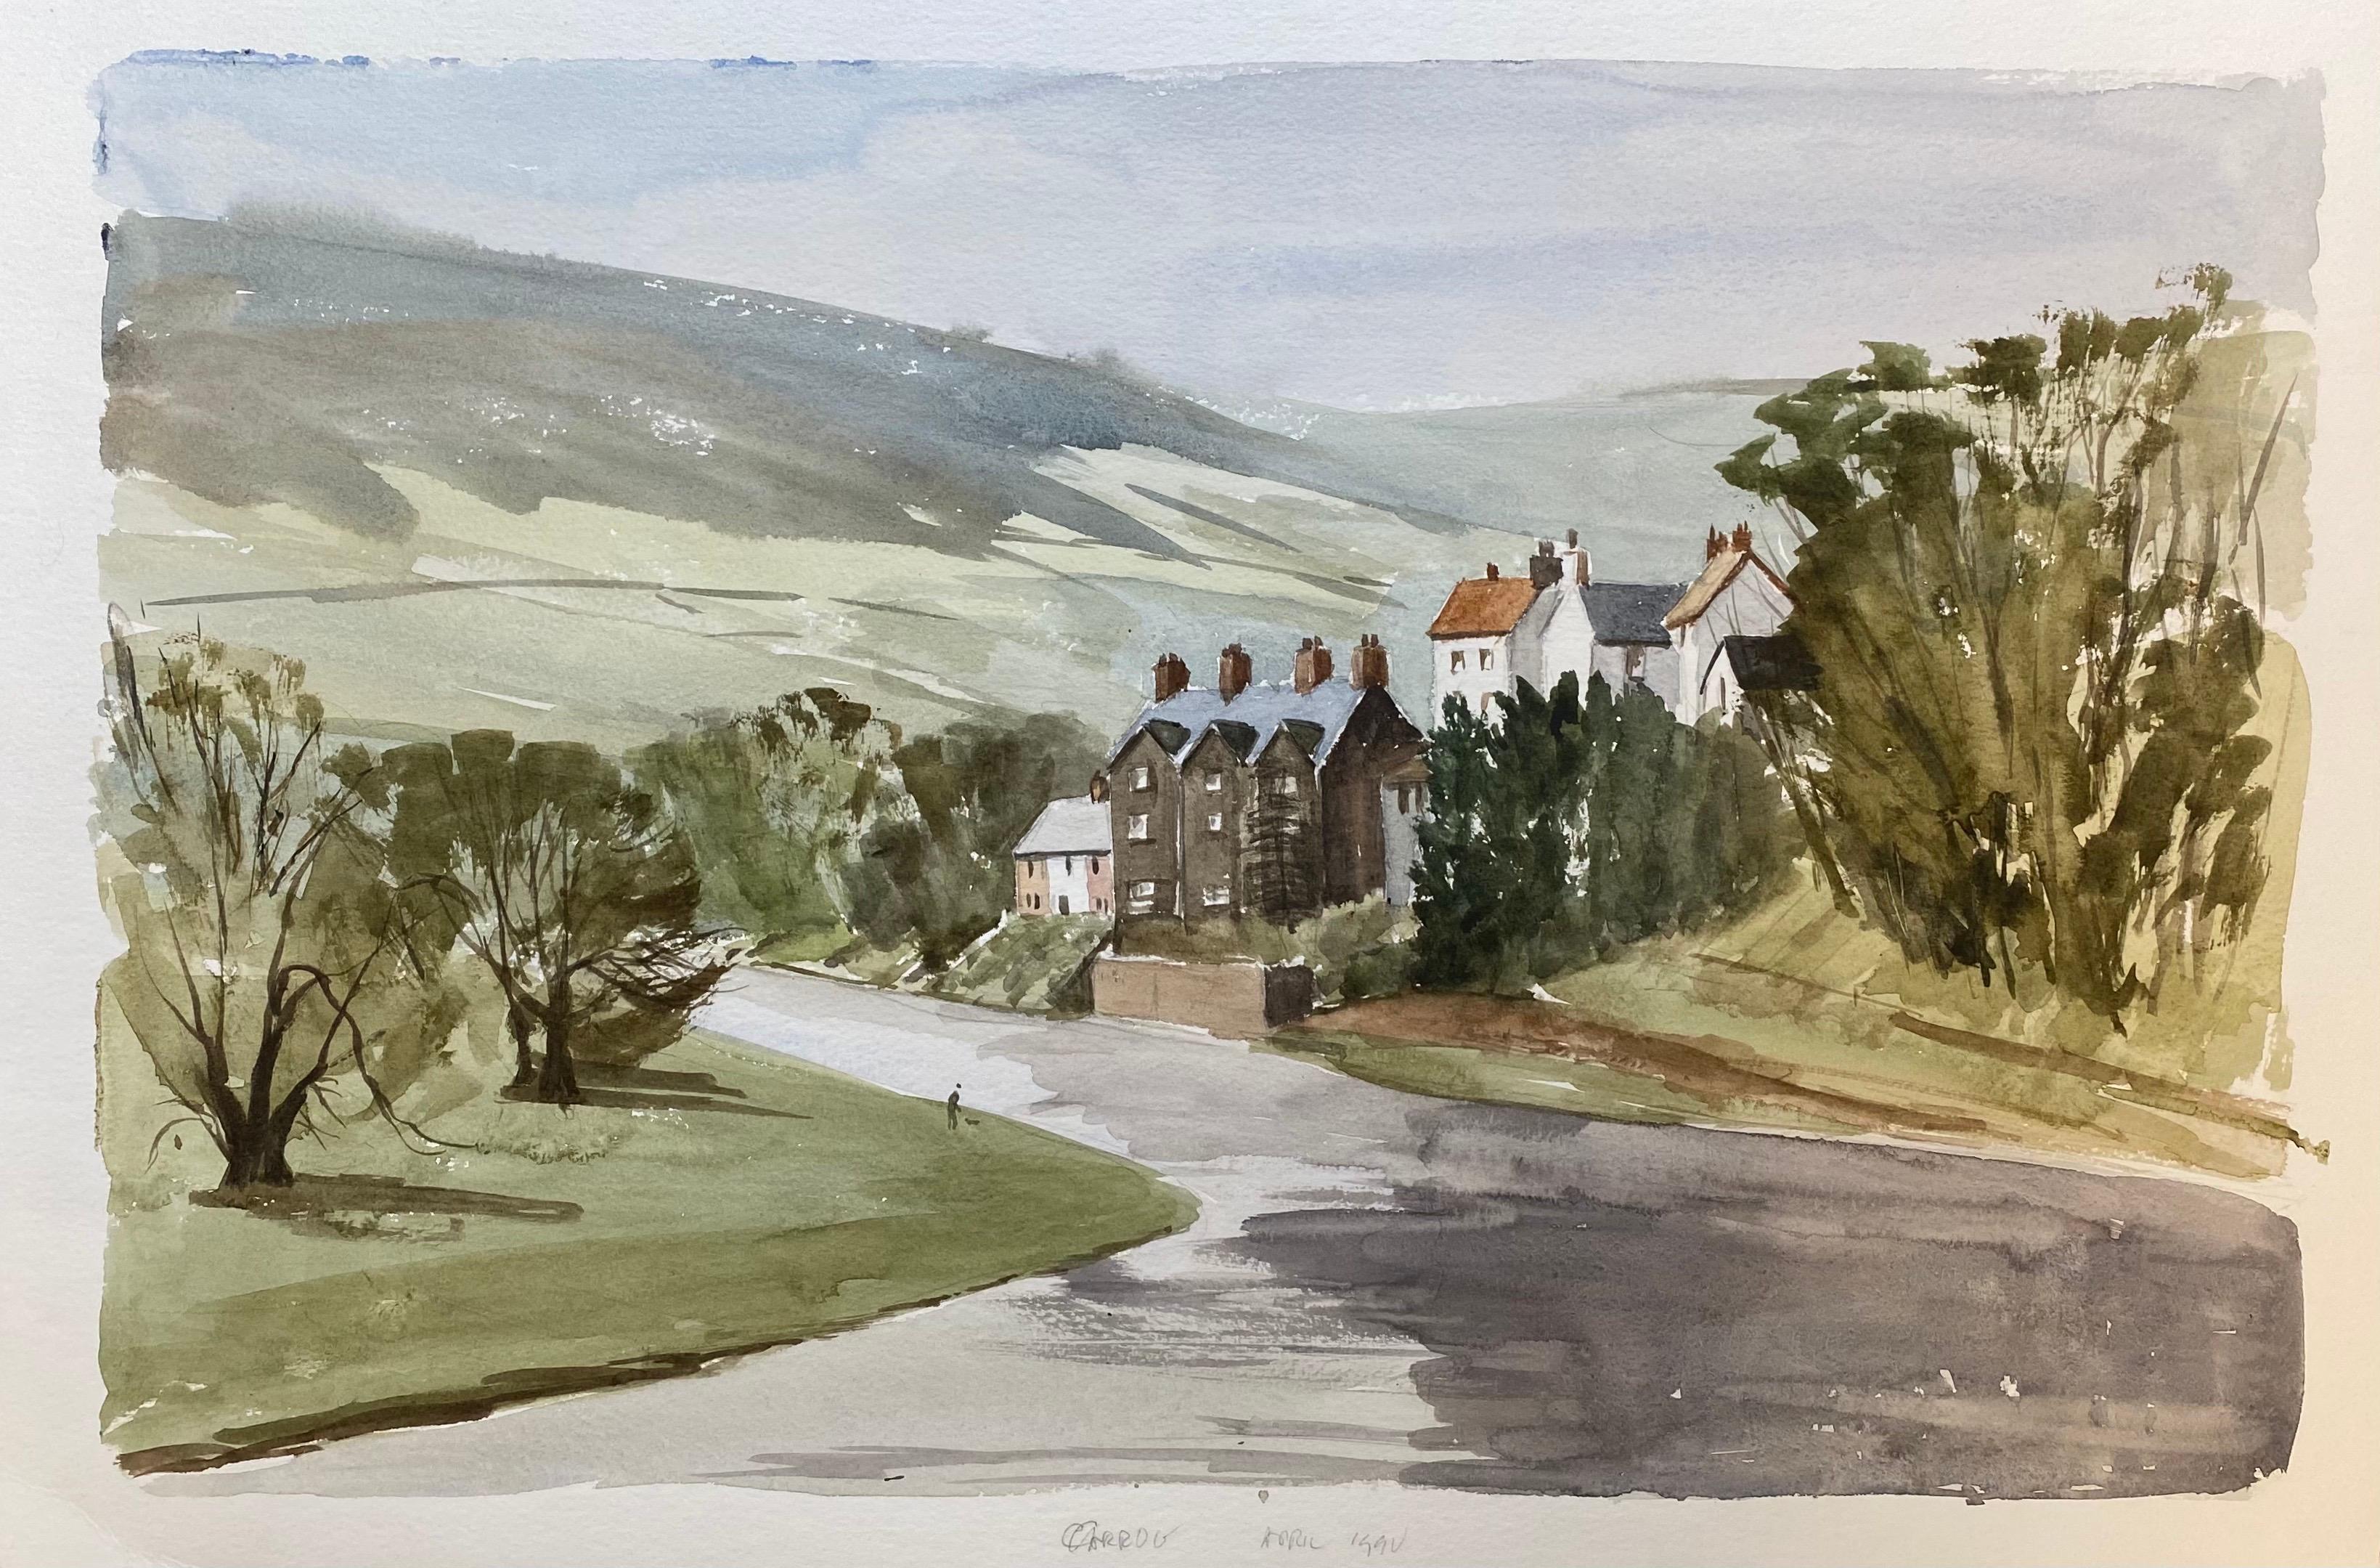 English Village
by Ronald Birch, British circa 1970's
watercolour on art paper, unframed
overall paper measures: 15 x 22 inches
signed lower corner

*Free Shipping On This Painting*: American, Europe & United Kingdom

Lovely original